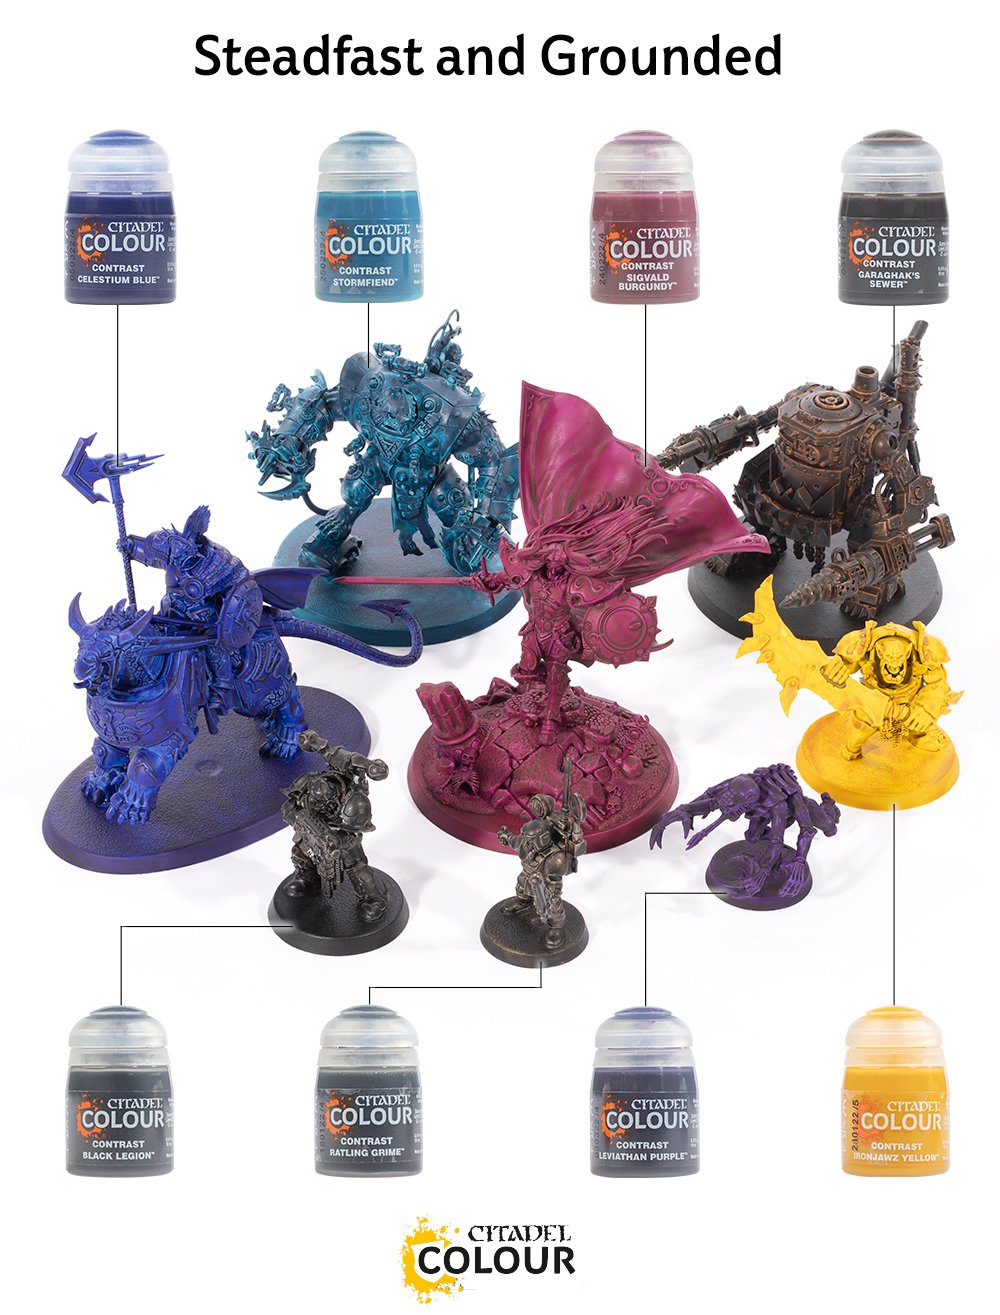 New Contrast Paints & Updated Shades Expand The Citadel Range